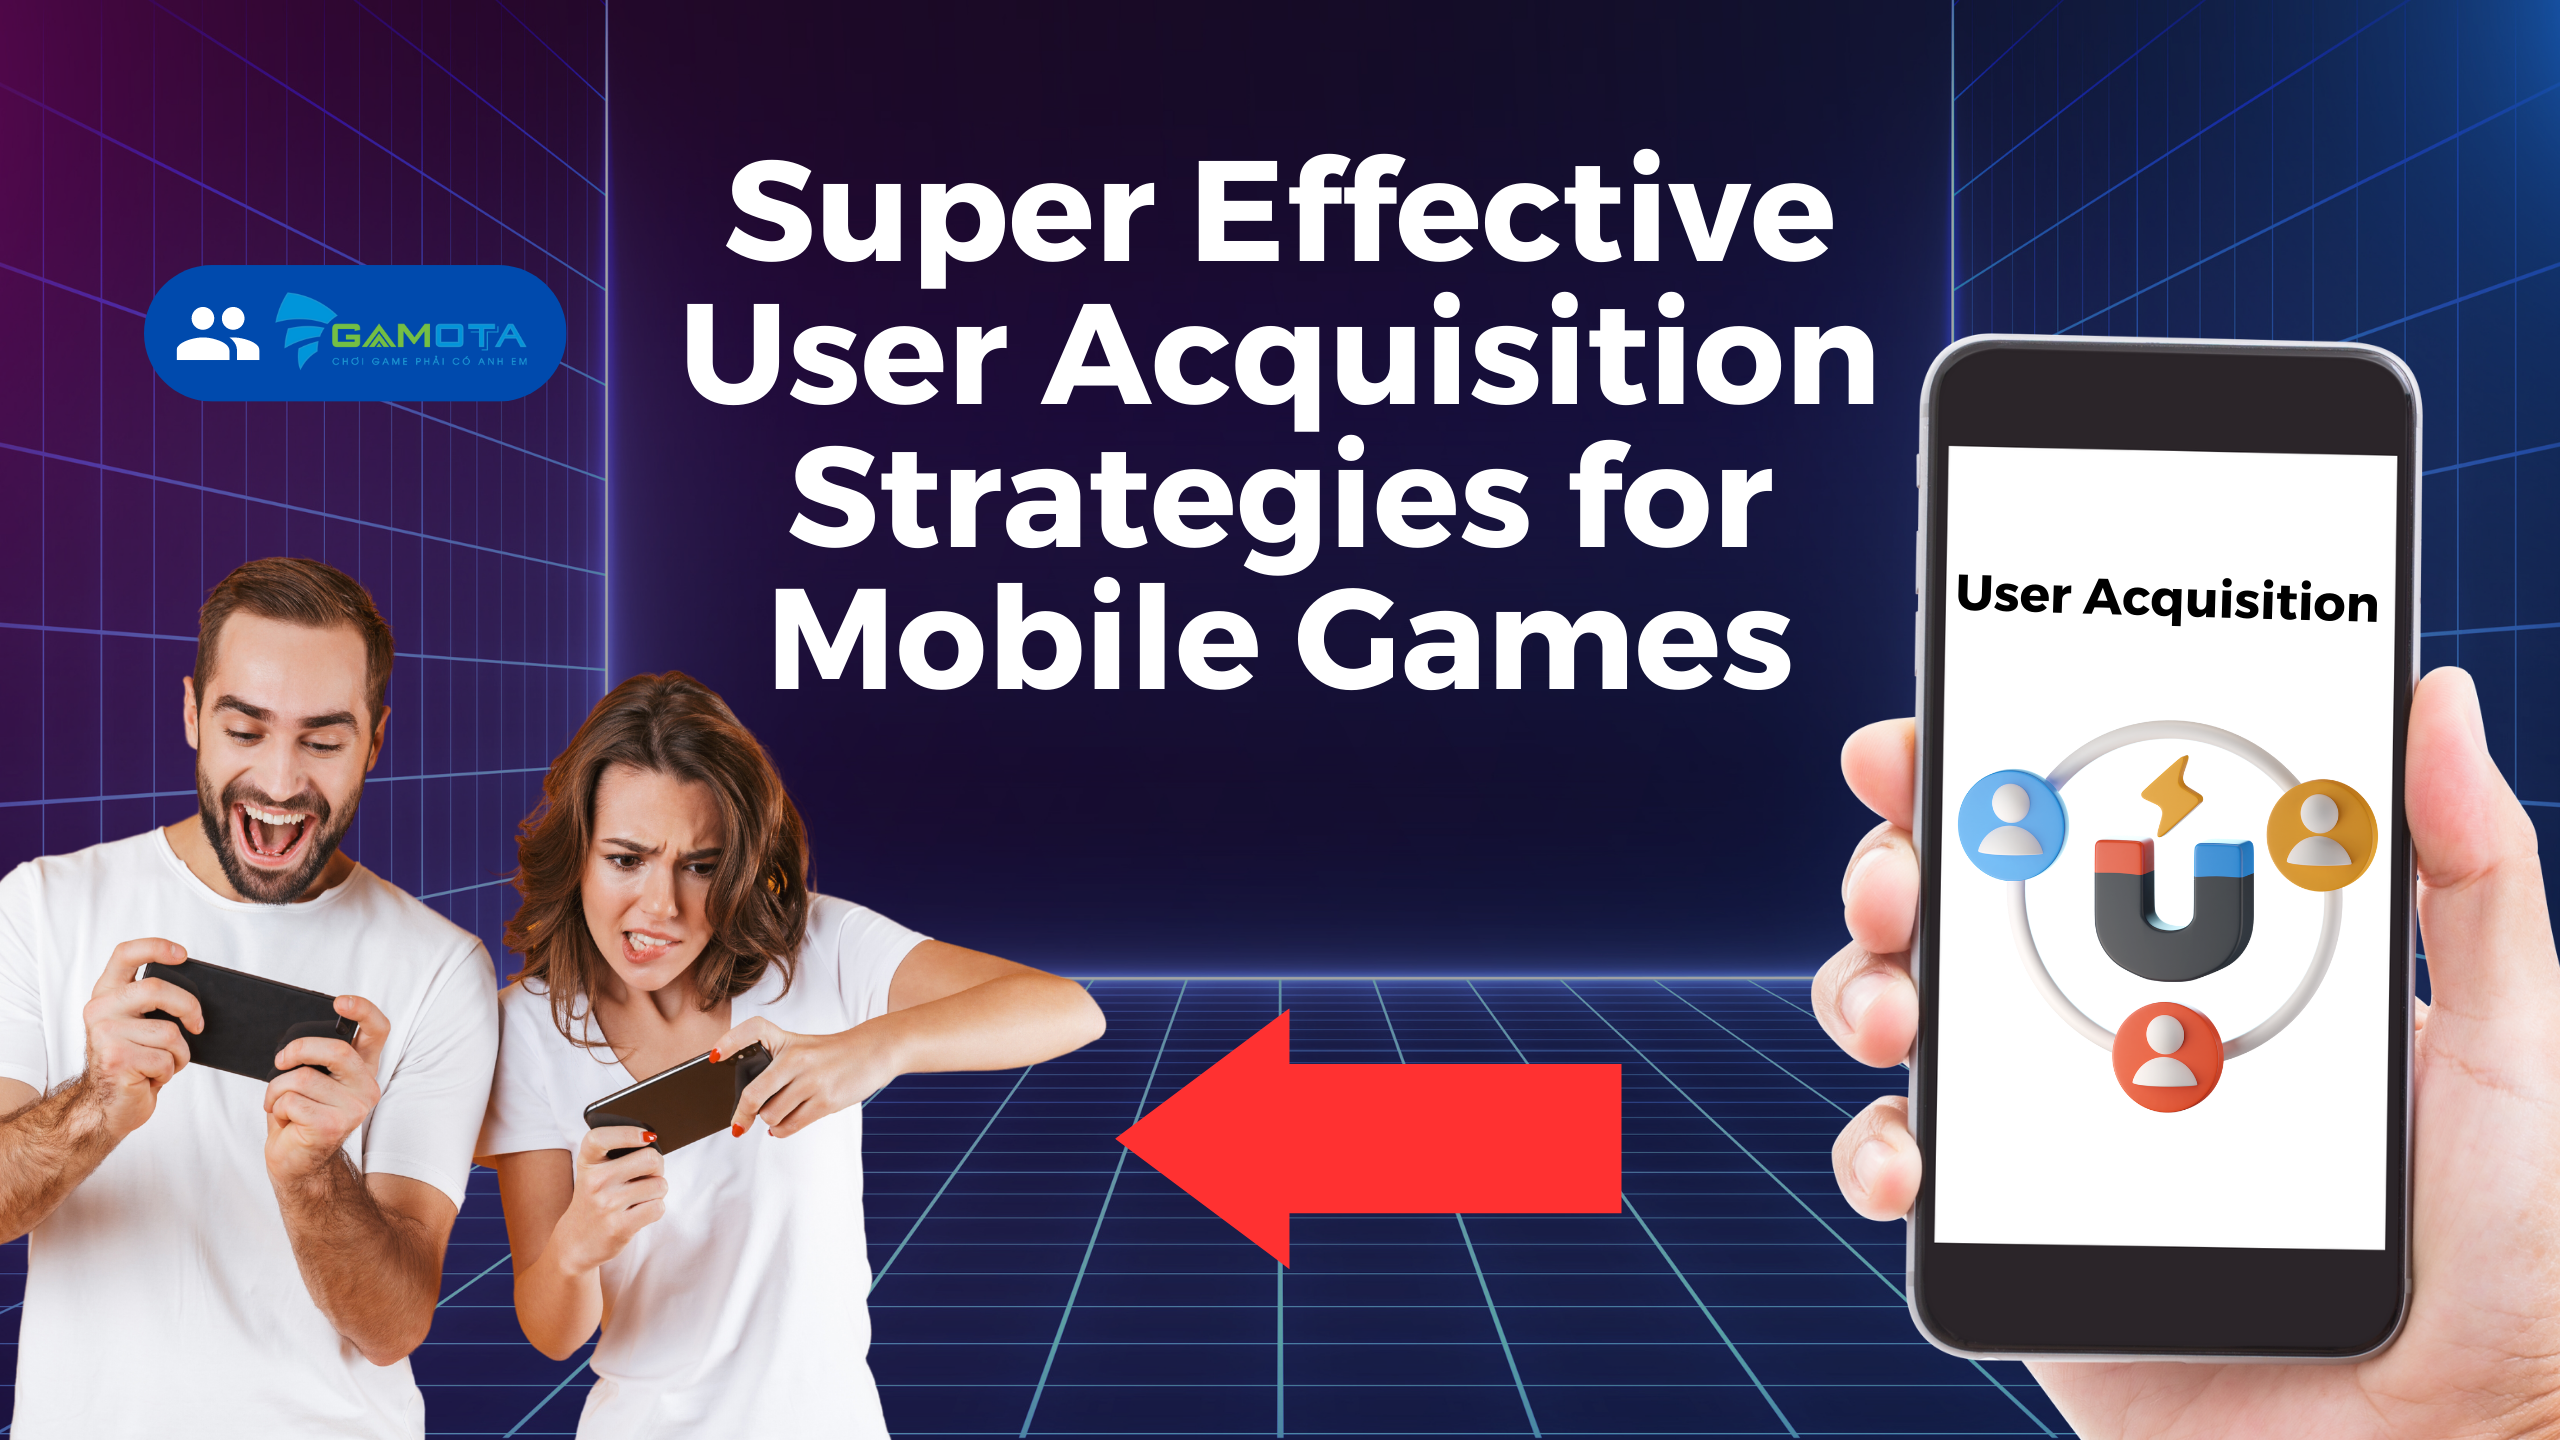 Super Effective User Acquisition Strategies for Mobile Games